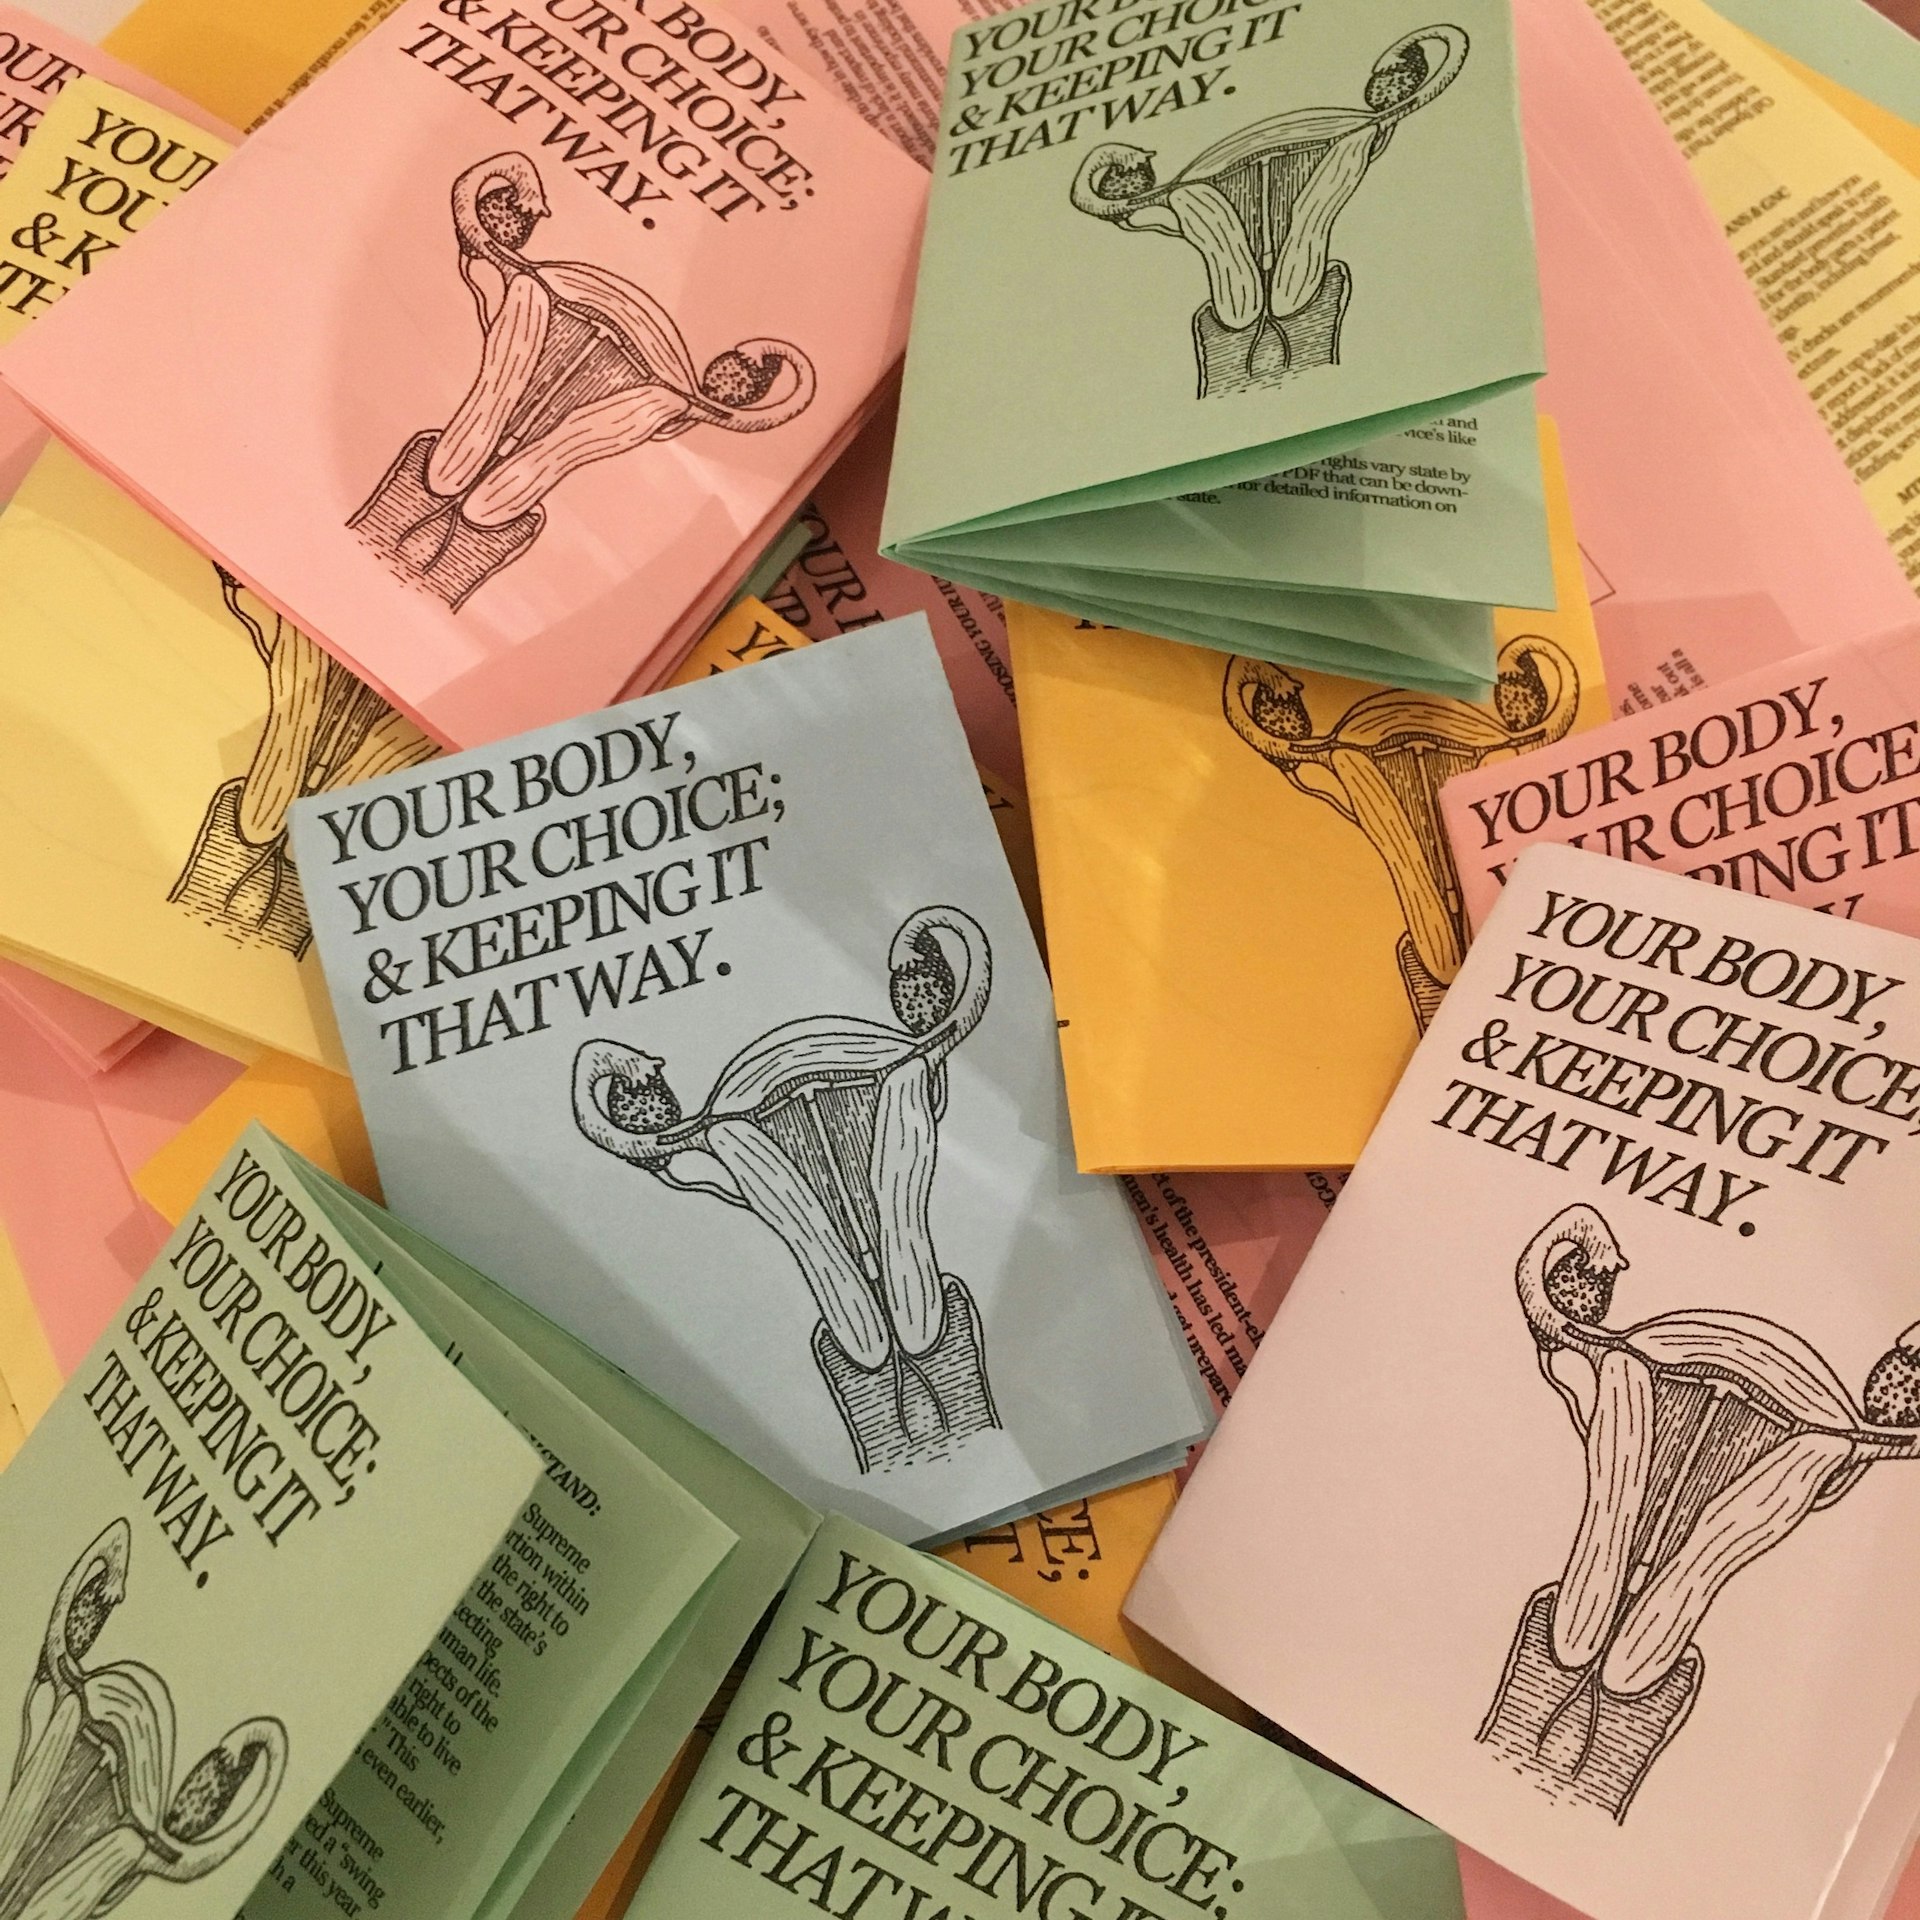 The reproductive rights zine informing American women